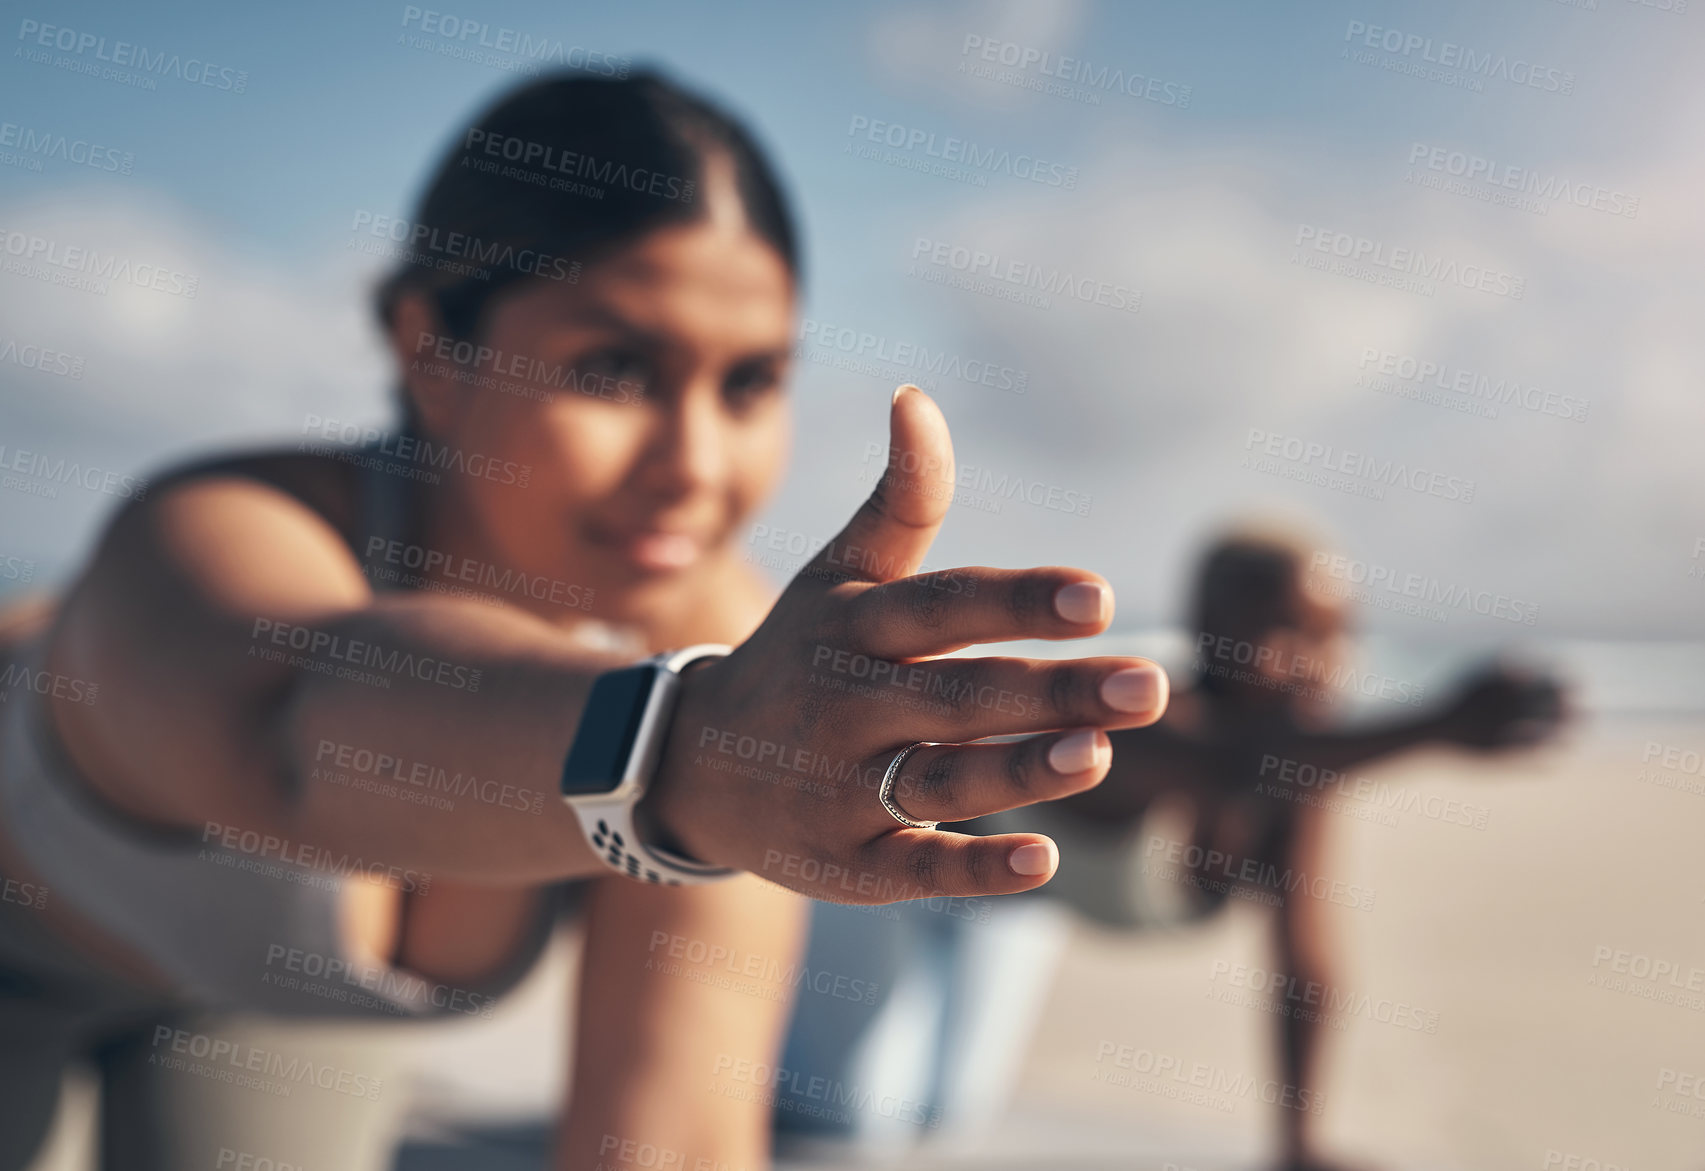 Buy stock photo Shot of a young woman wearing a smartwatch while practicing yoga at the beach